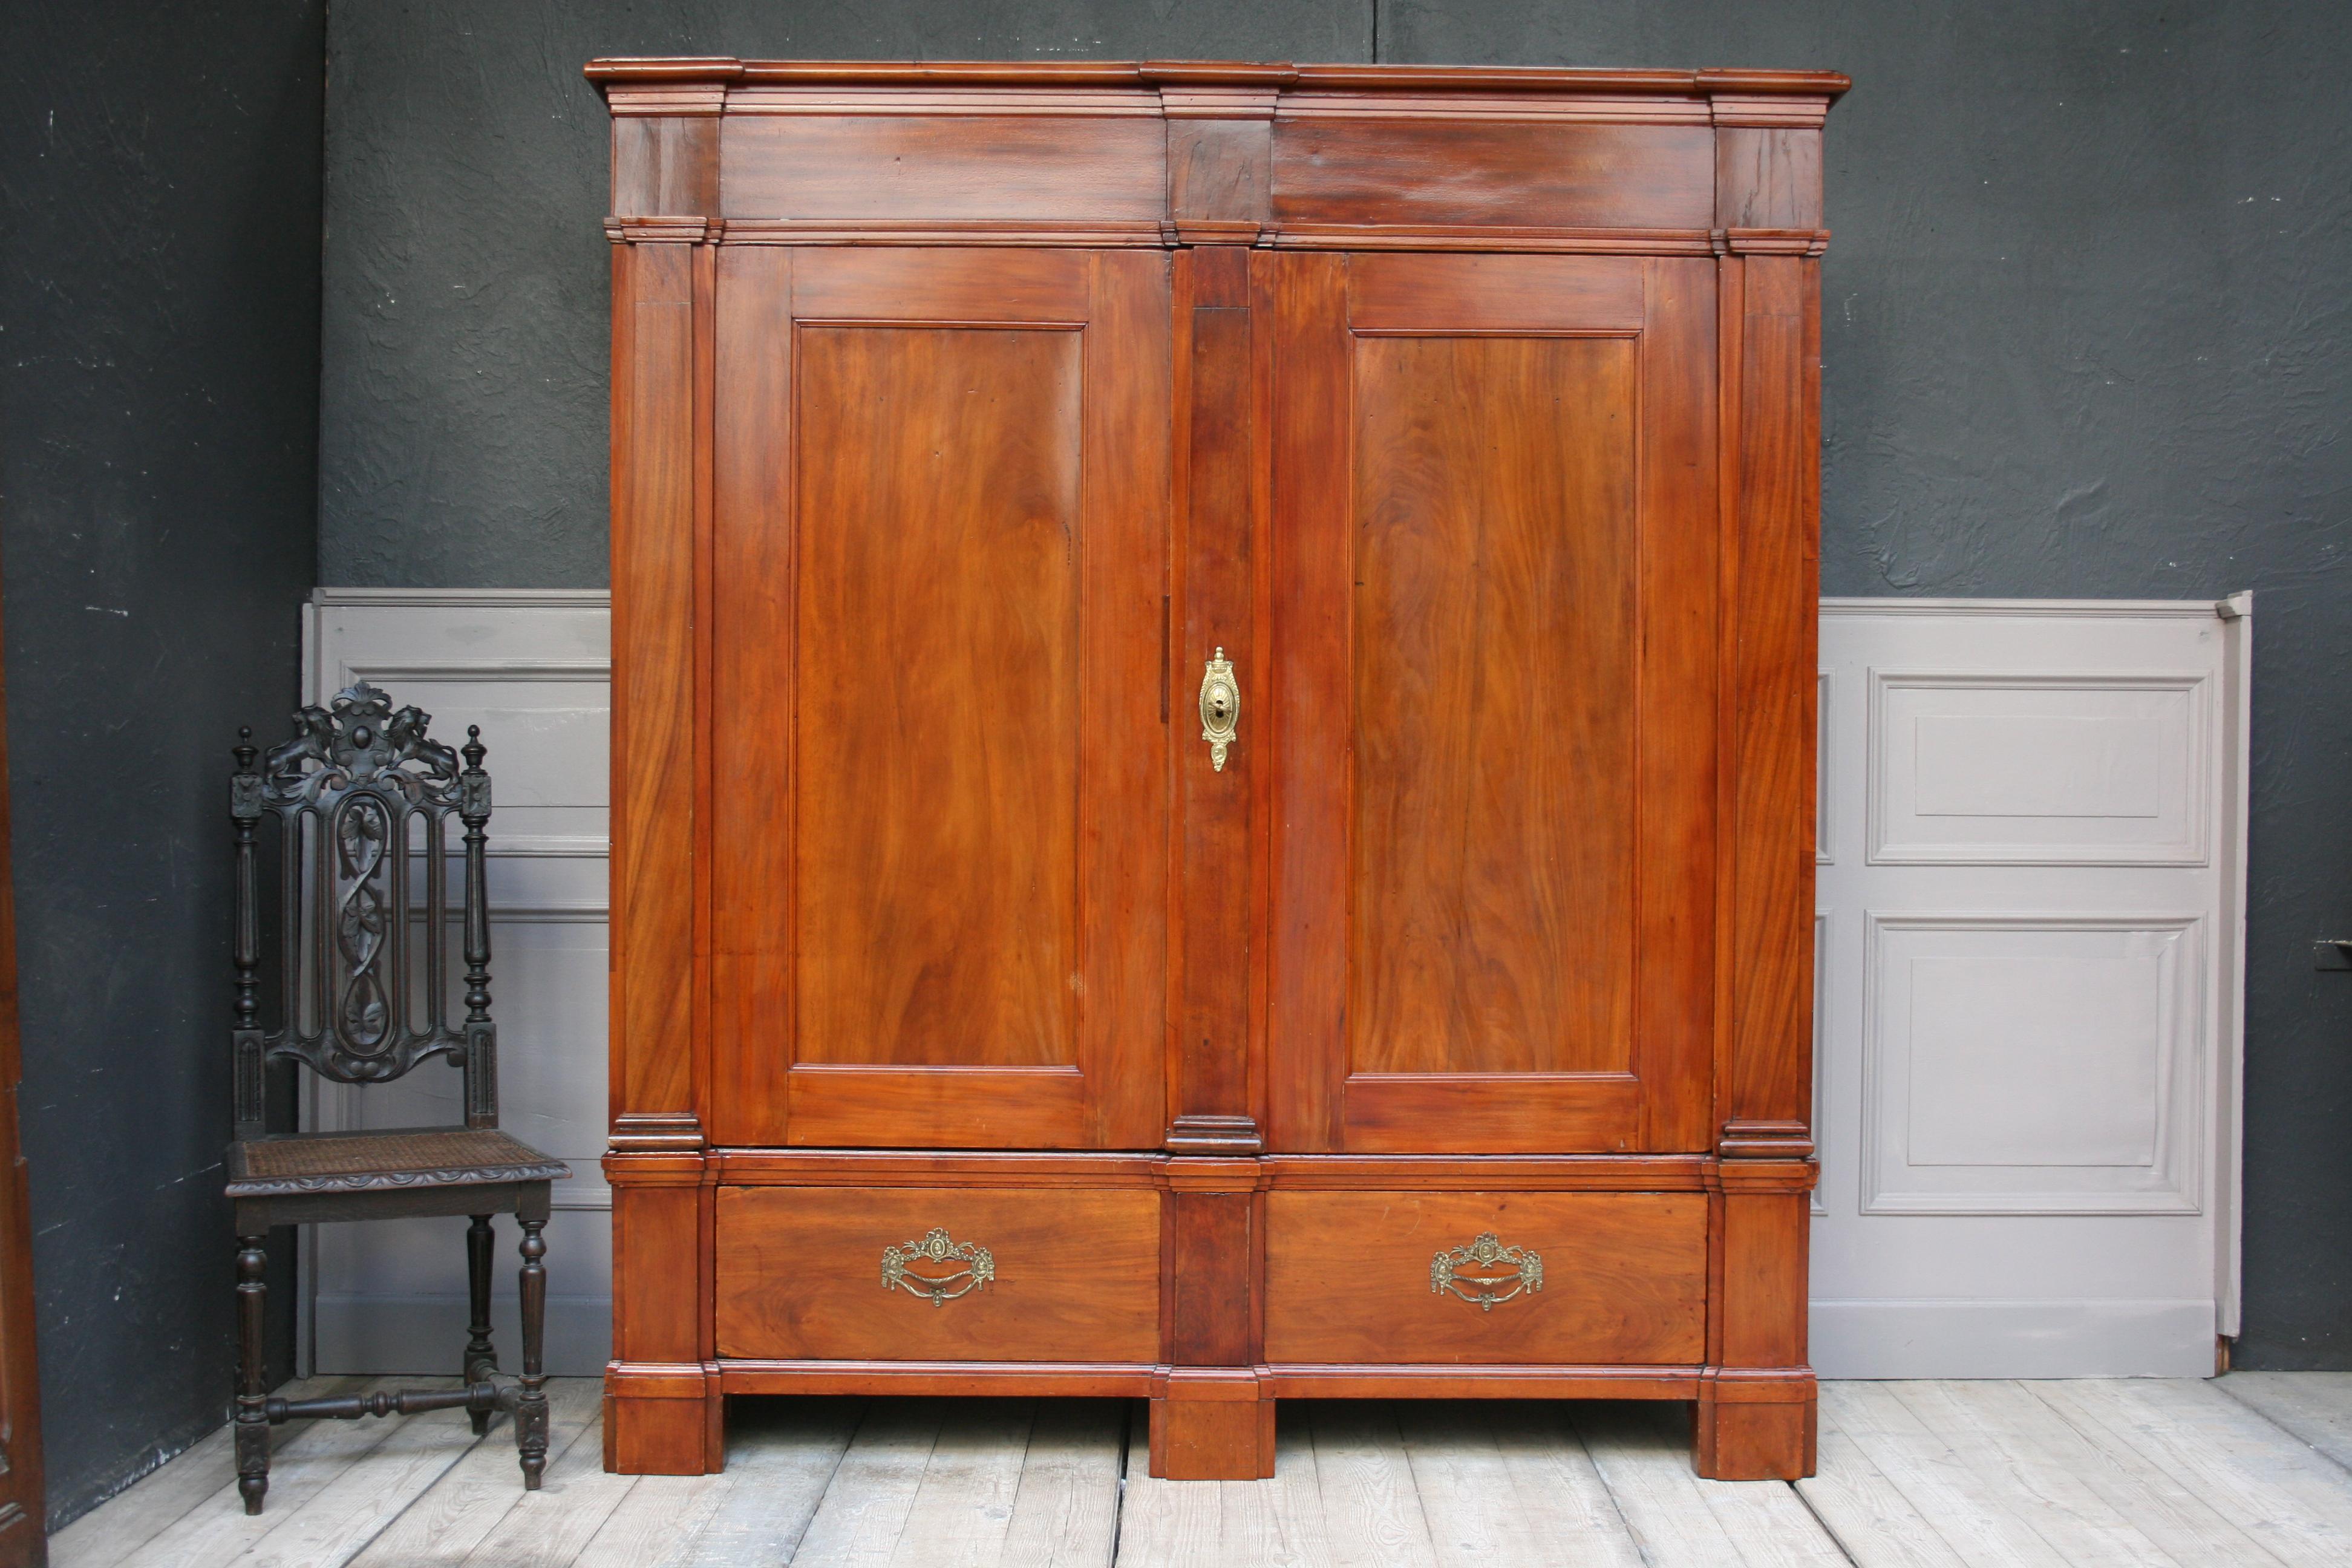 This noble cabinet impresses with its simple elegance. It probably comes from the Rhineland, around the beginning / mid-19th century.
The cabinet is cherry veneered. Inside there are 4 height-adjustable shelves. A large continuous drawer in the